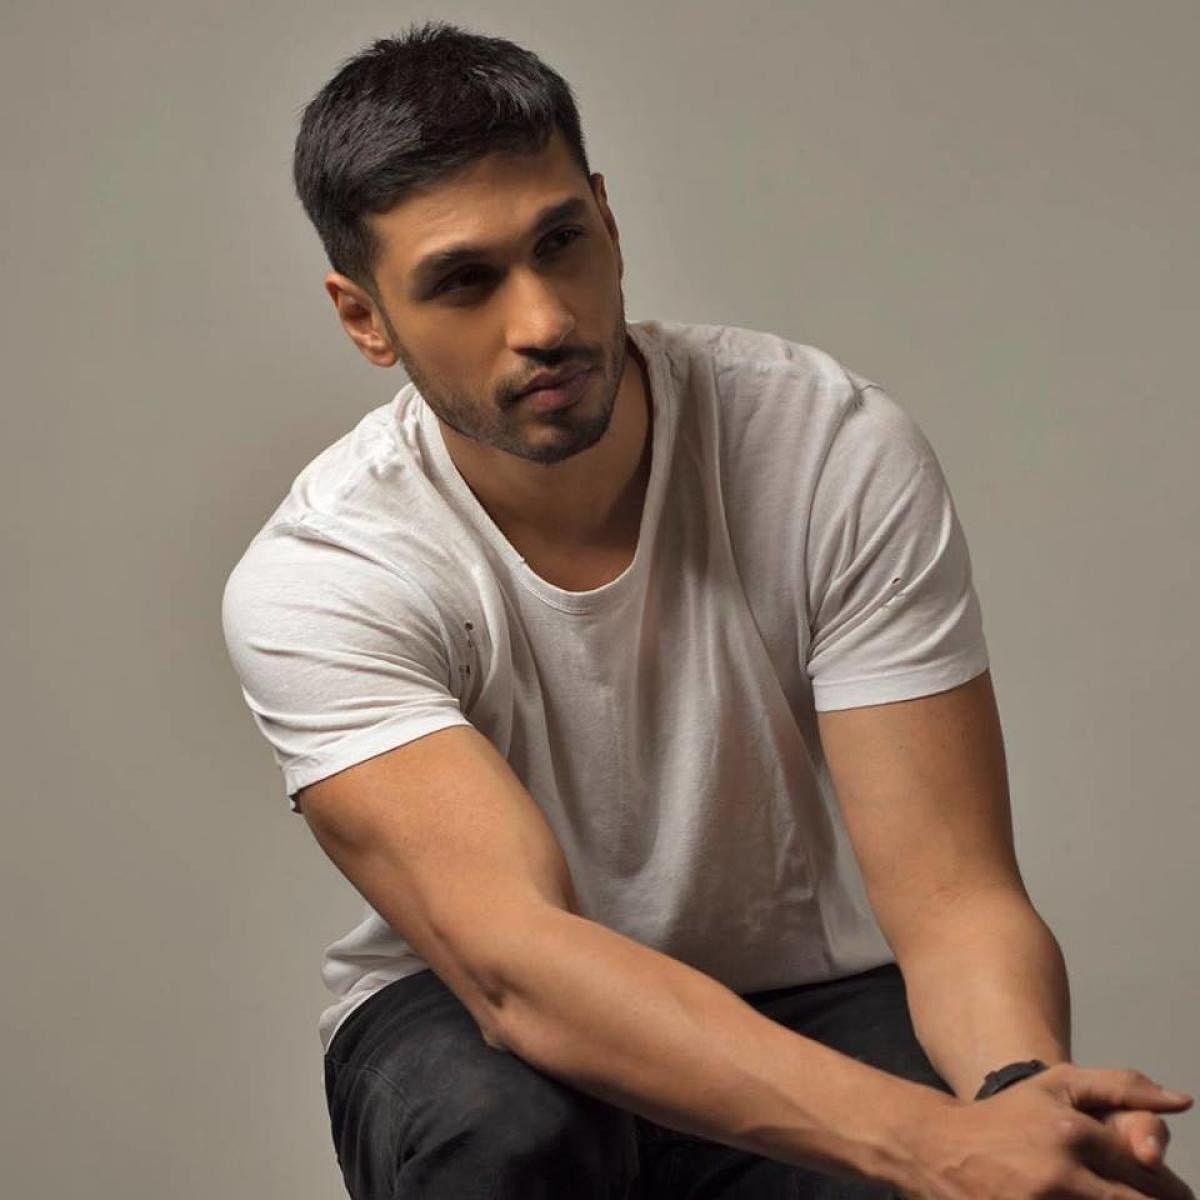 Arjun Kanungo’s new music video shows him and Carla as military officers.